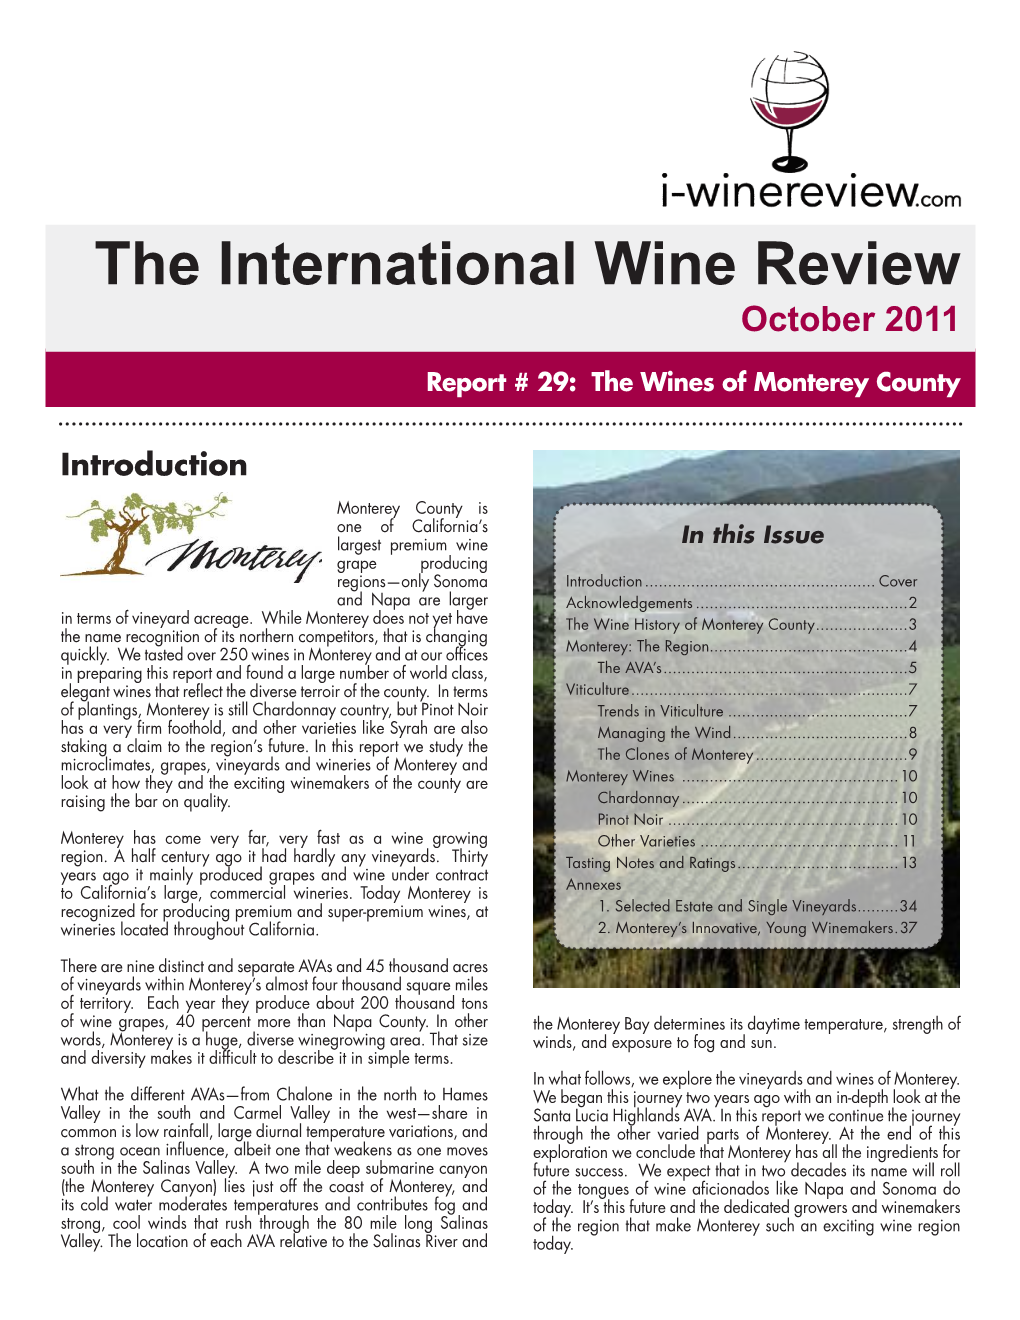 The International Wine Review October 2011